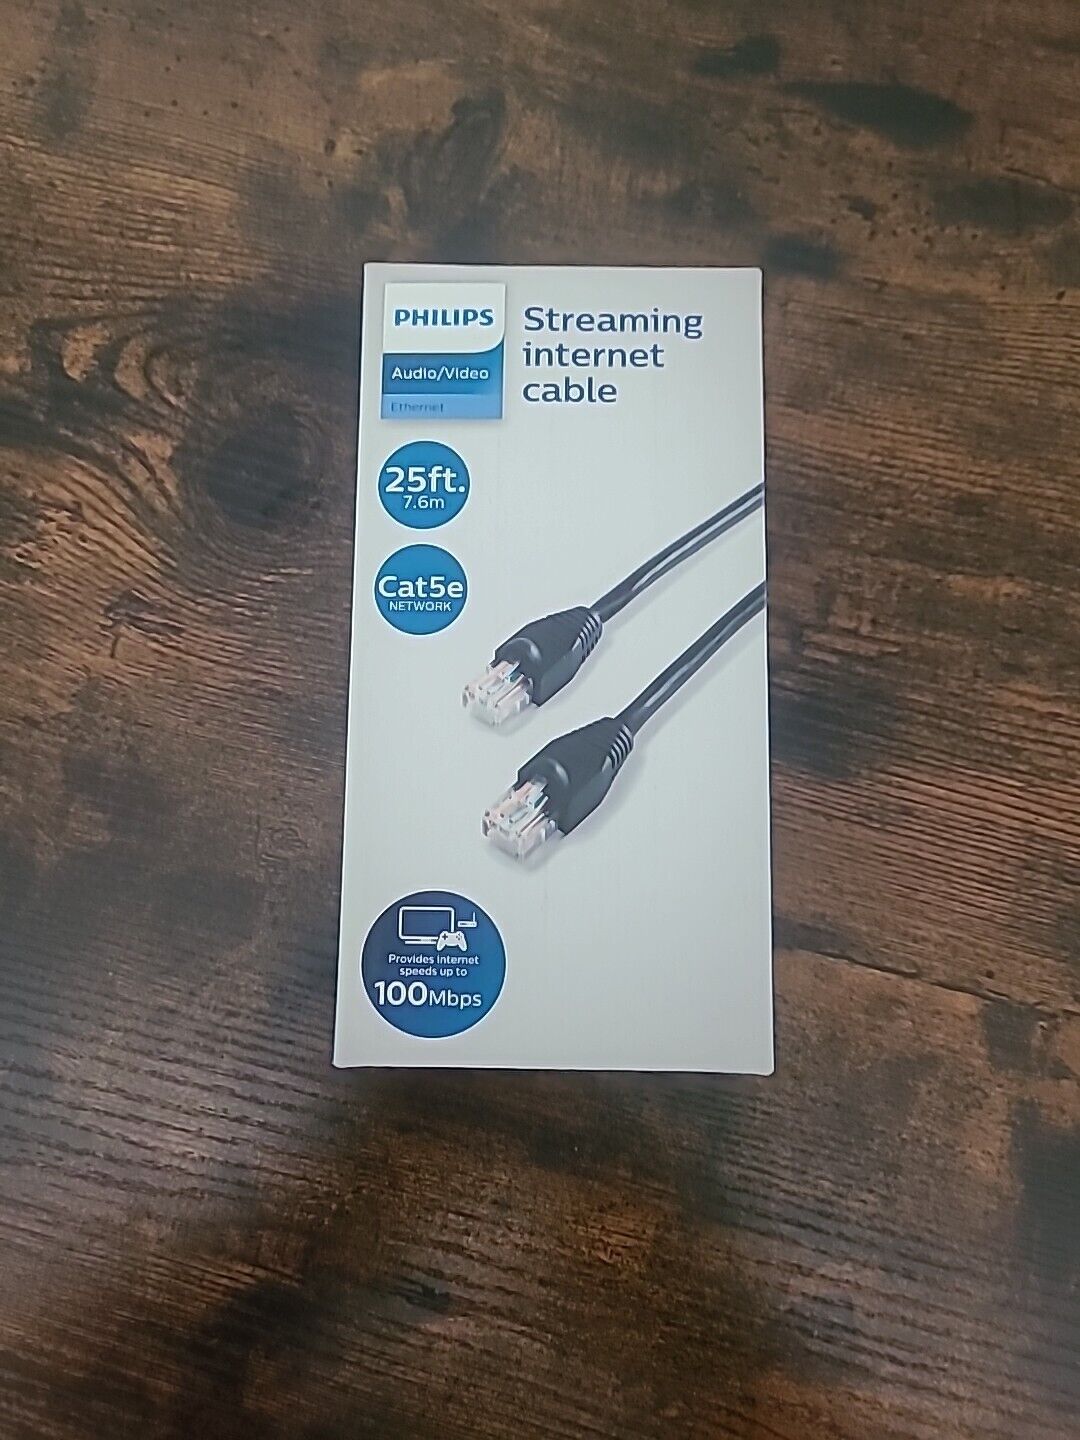 PHILIPS 25 ft. STREAMING INTERNET CABLE Cat5e